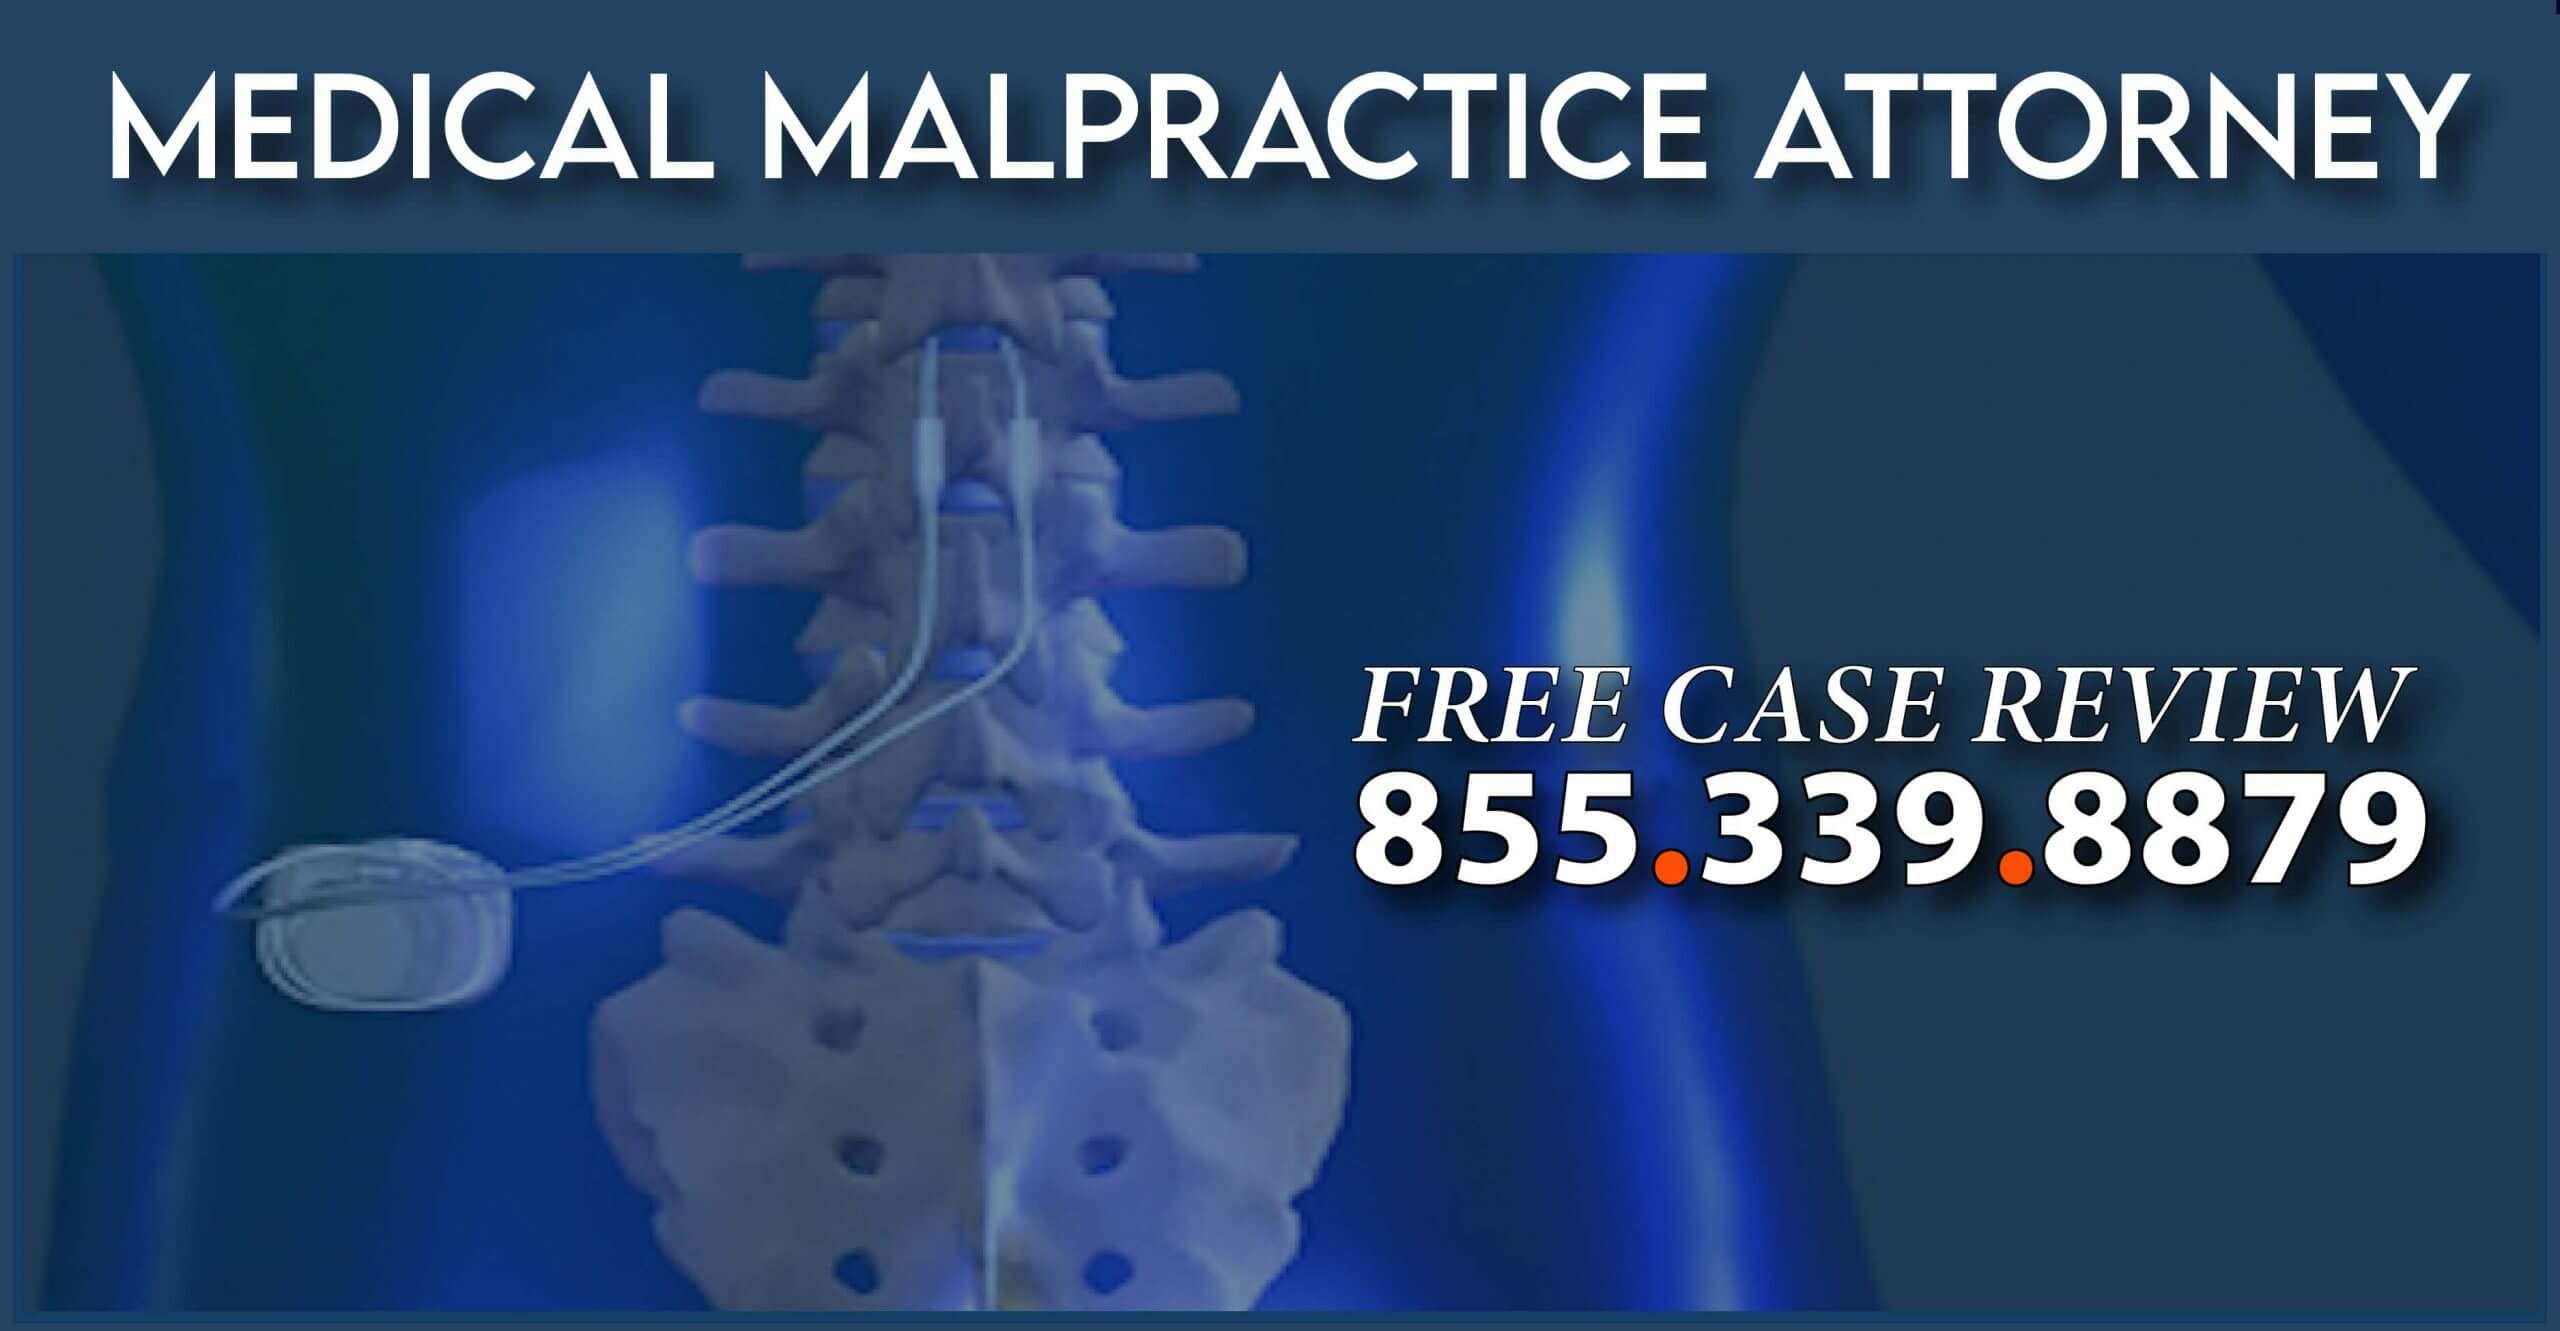 Spinal Cord Stimulator Medical Malpractice Attorney Expense Pain Suffering dtla law firm